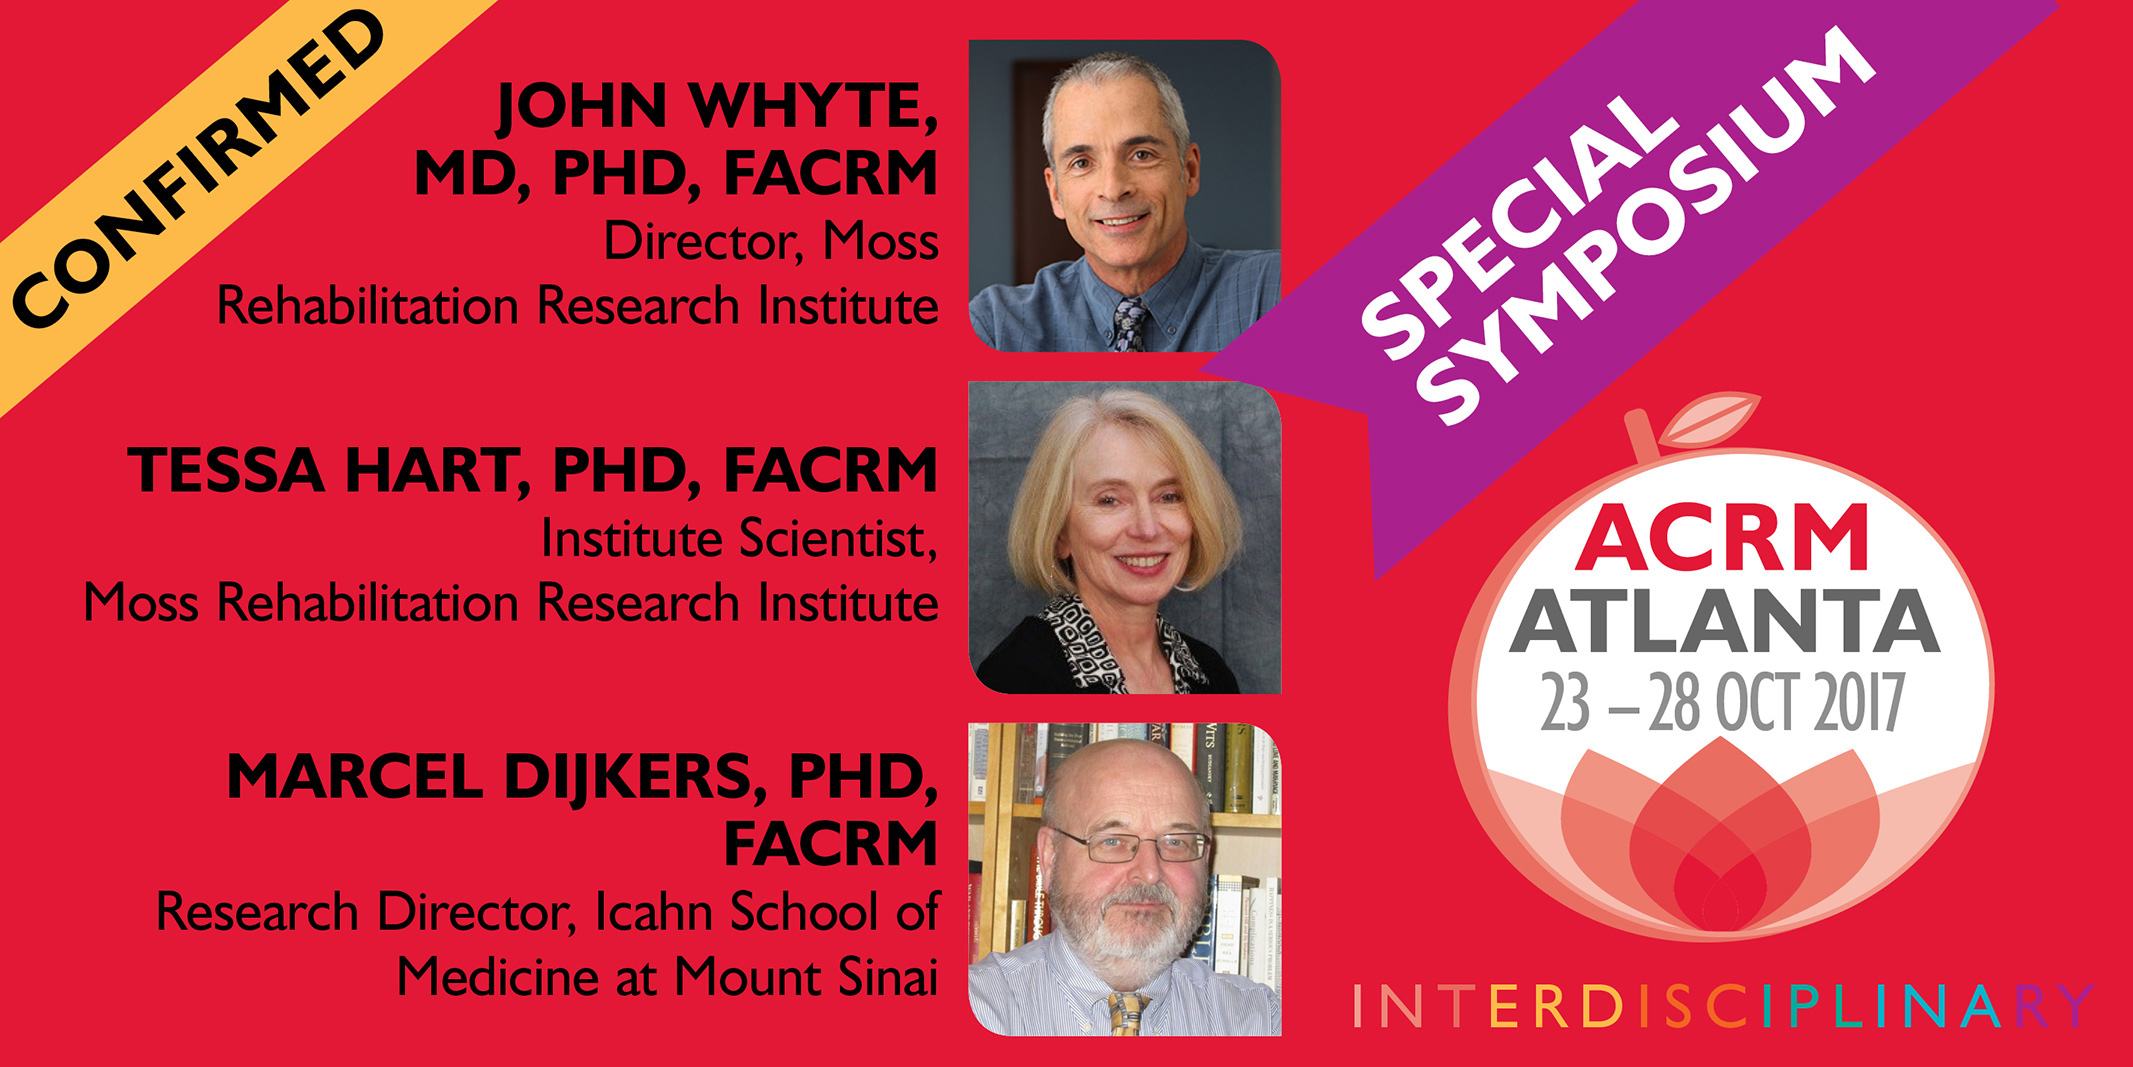 Special Symposium with John Whyte, Tessa Hart & Marcel Dijkers